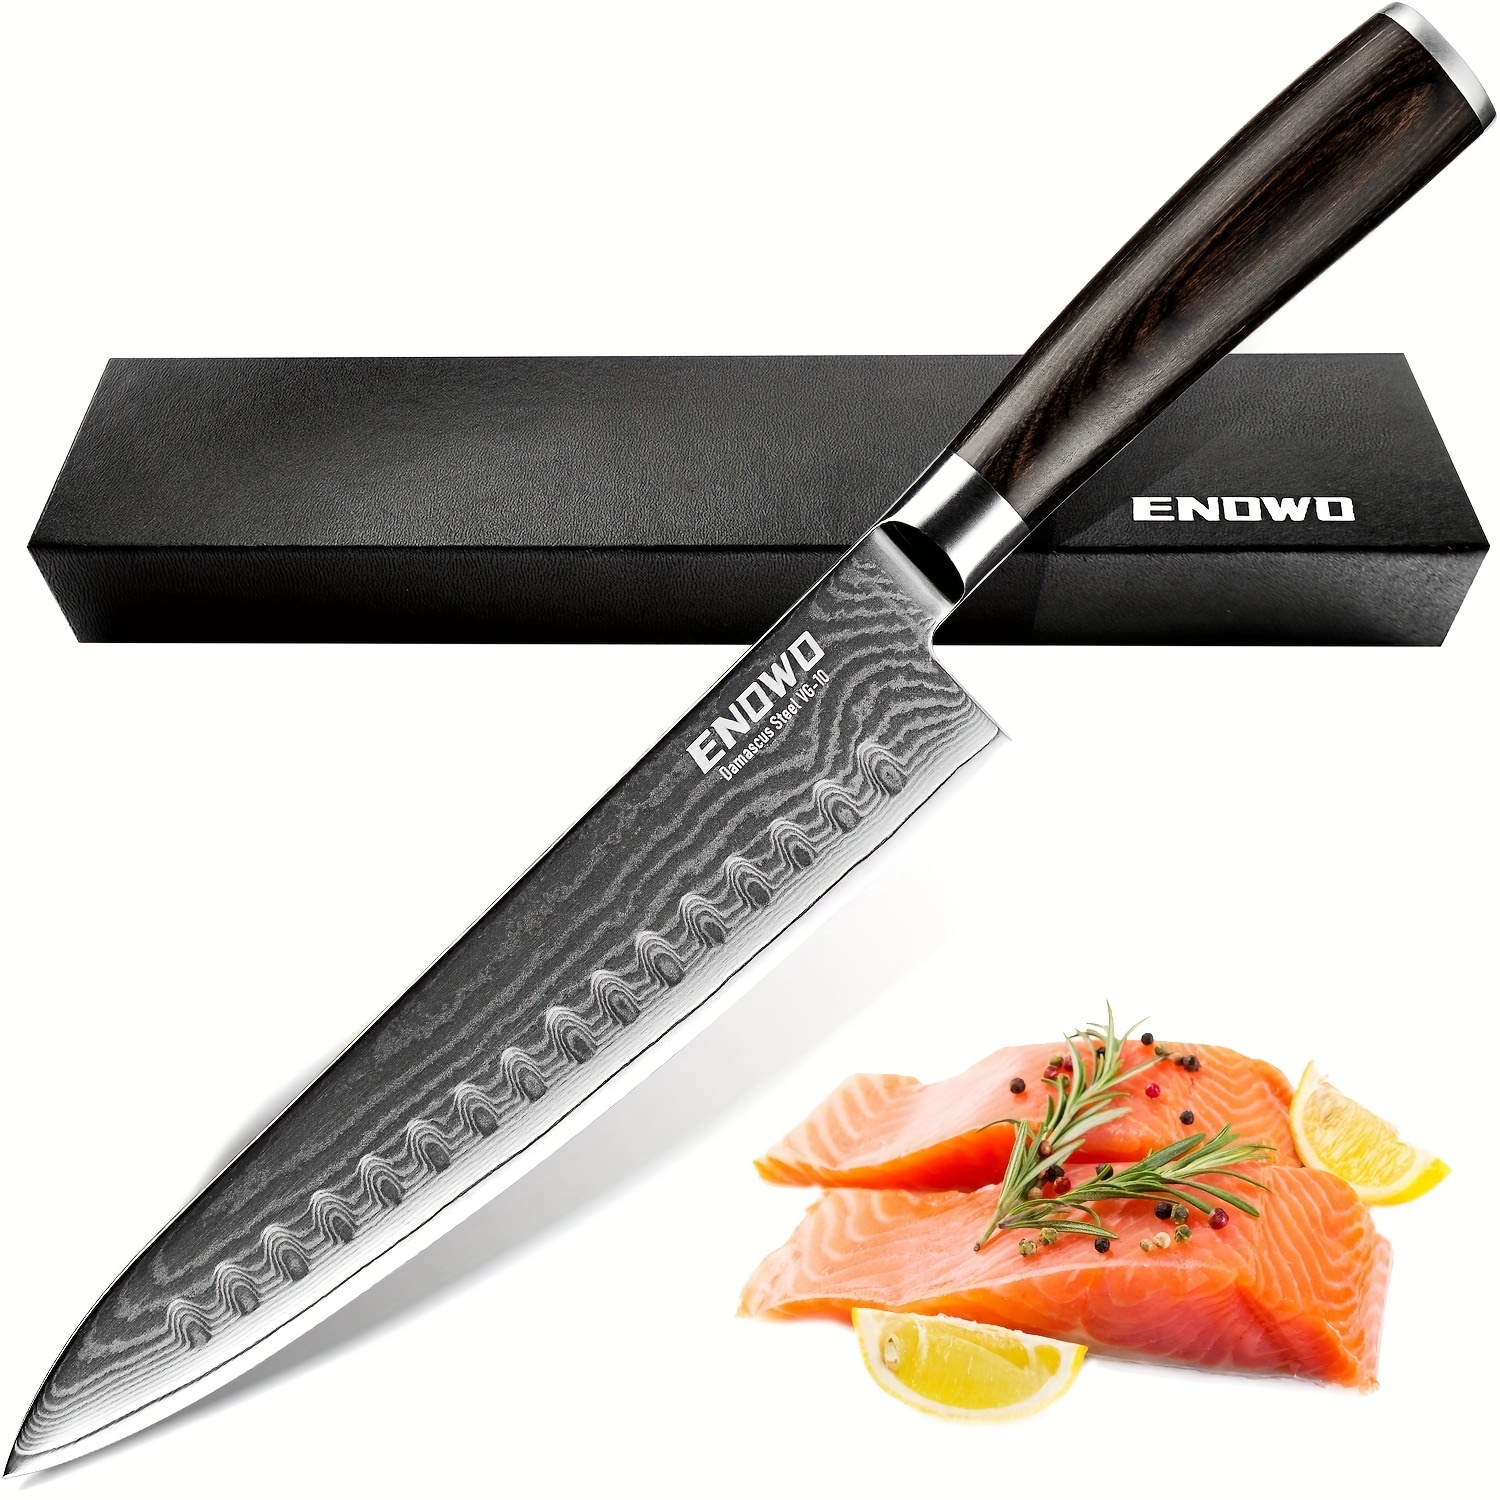 

Enowo Damascus Chef Knife 8 Inch With Clad Dimple, Razor Sharp Kitchen Carving Sushi Knife Made Of Japanese Vg-10 Stainless Steel, Gift Box, Ergonomic, Superb Edge Retention